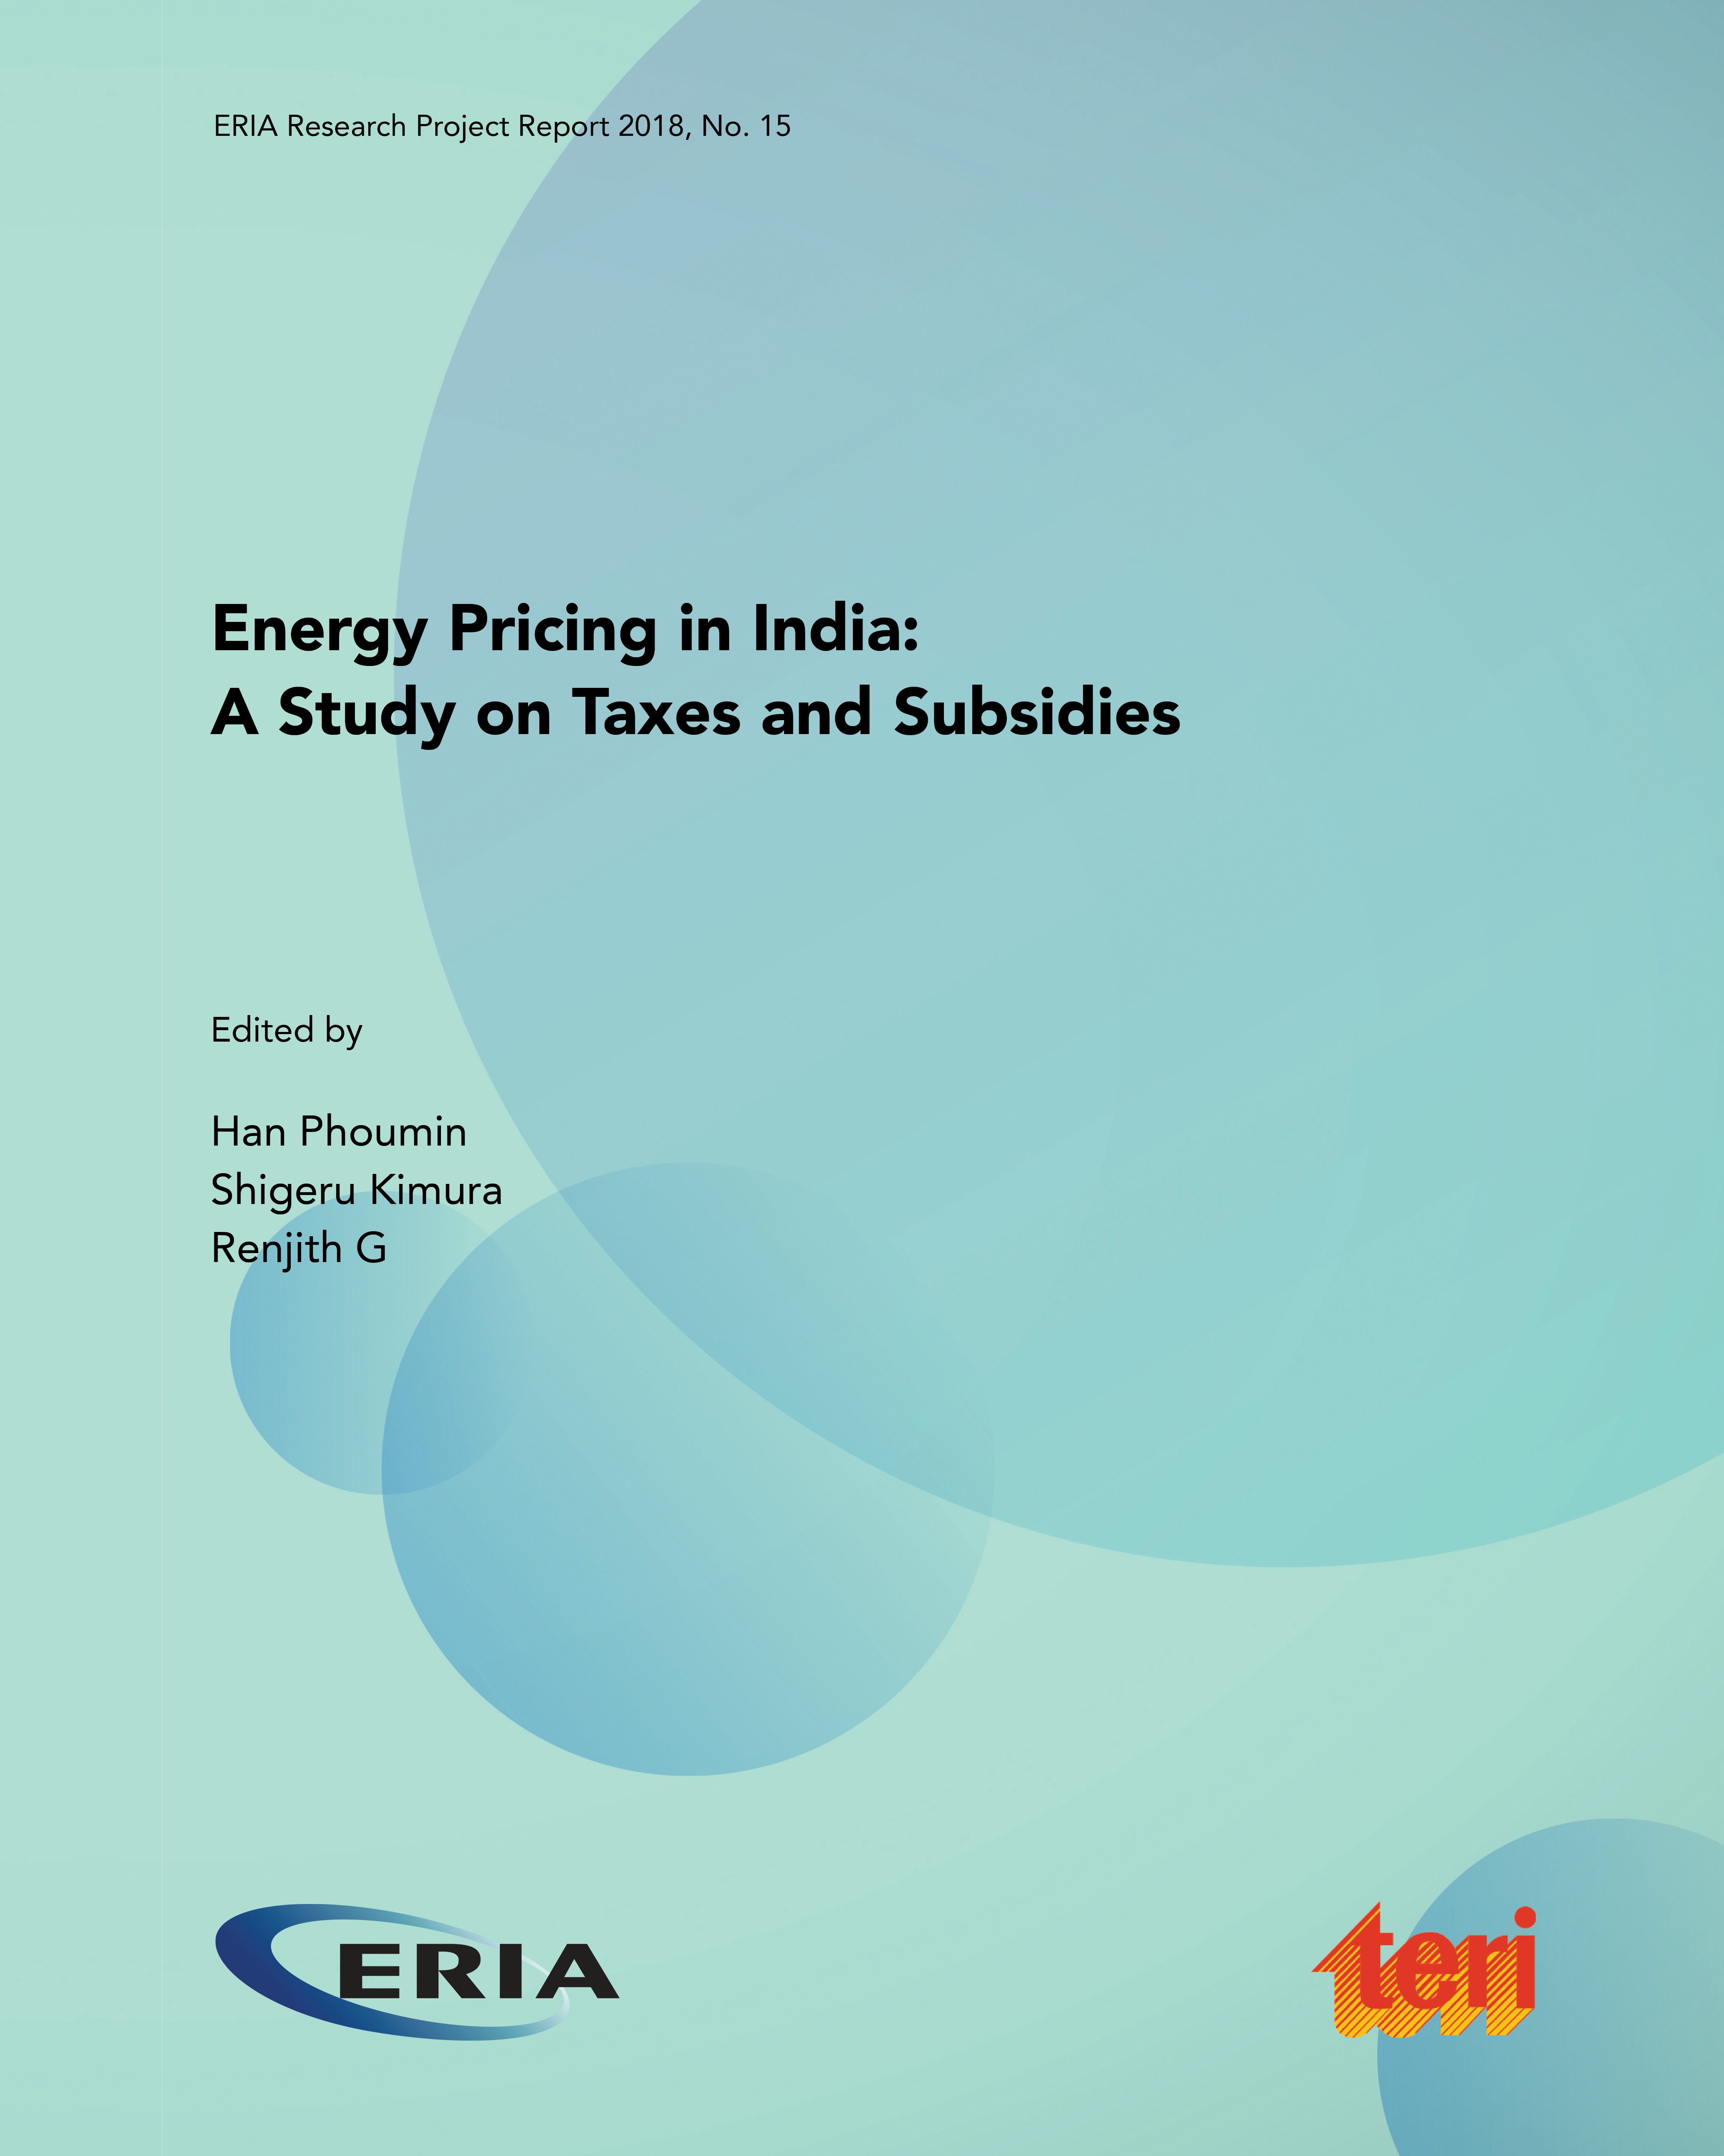 Energy Pricing in India: A Study on Taxes and Subsidies